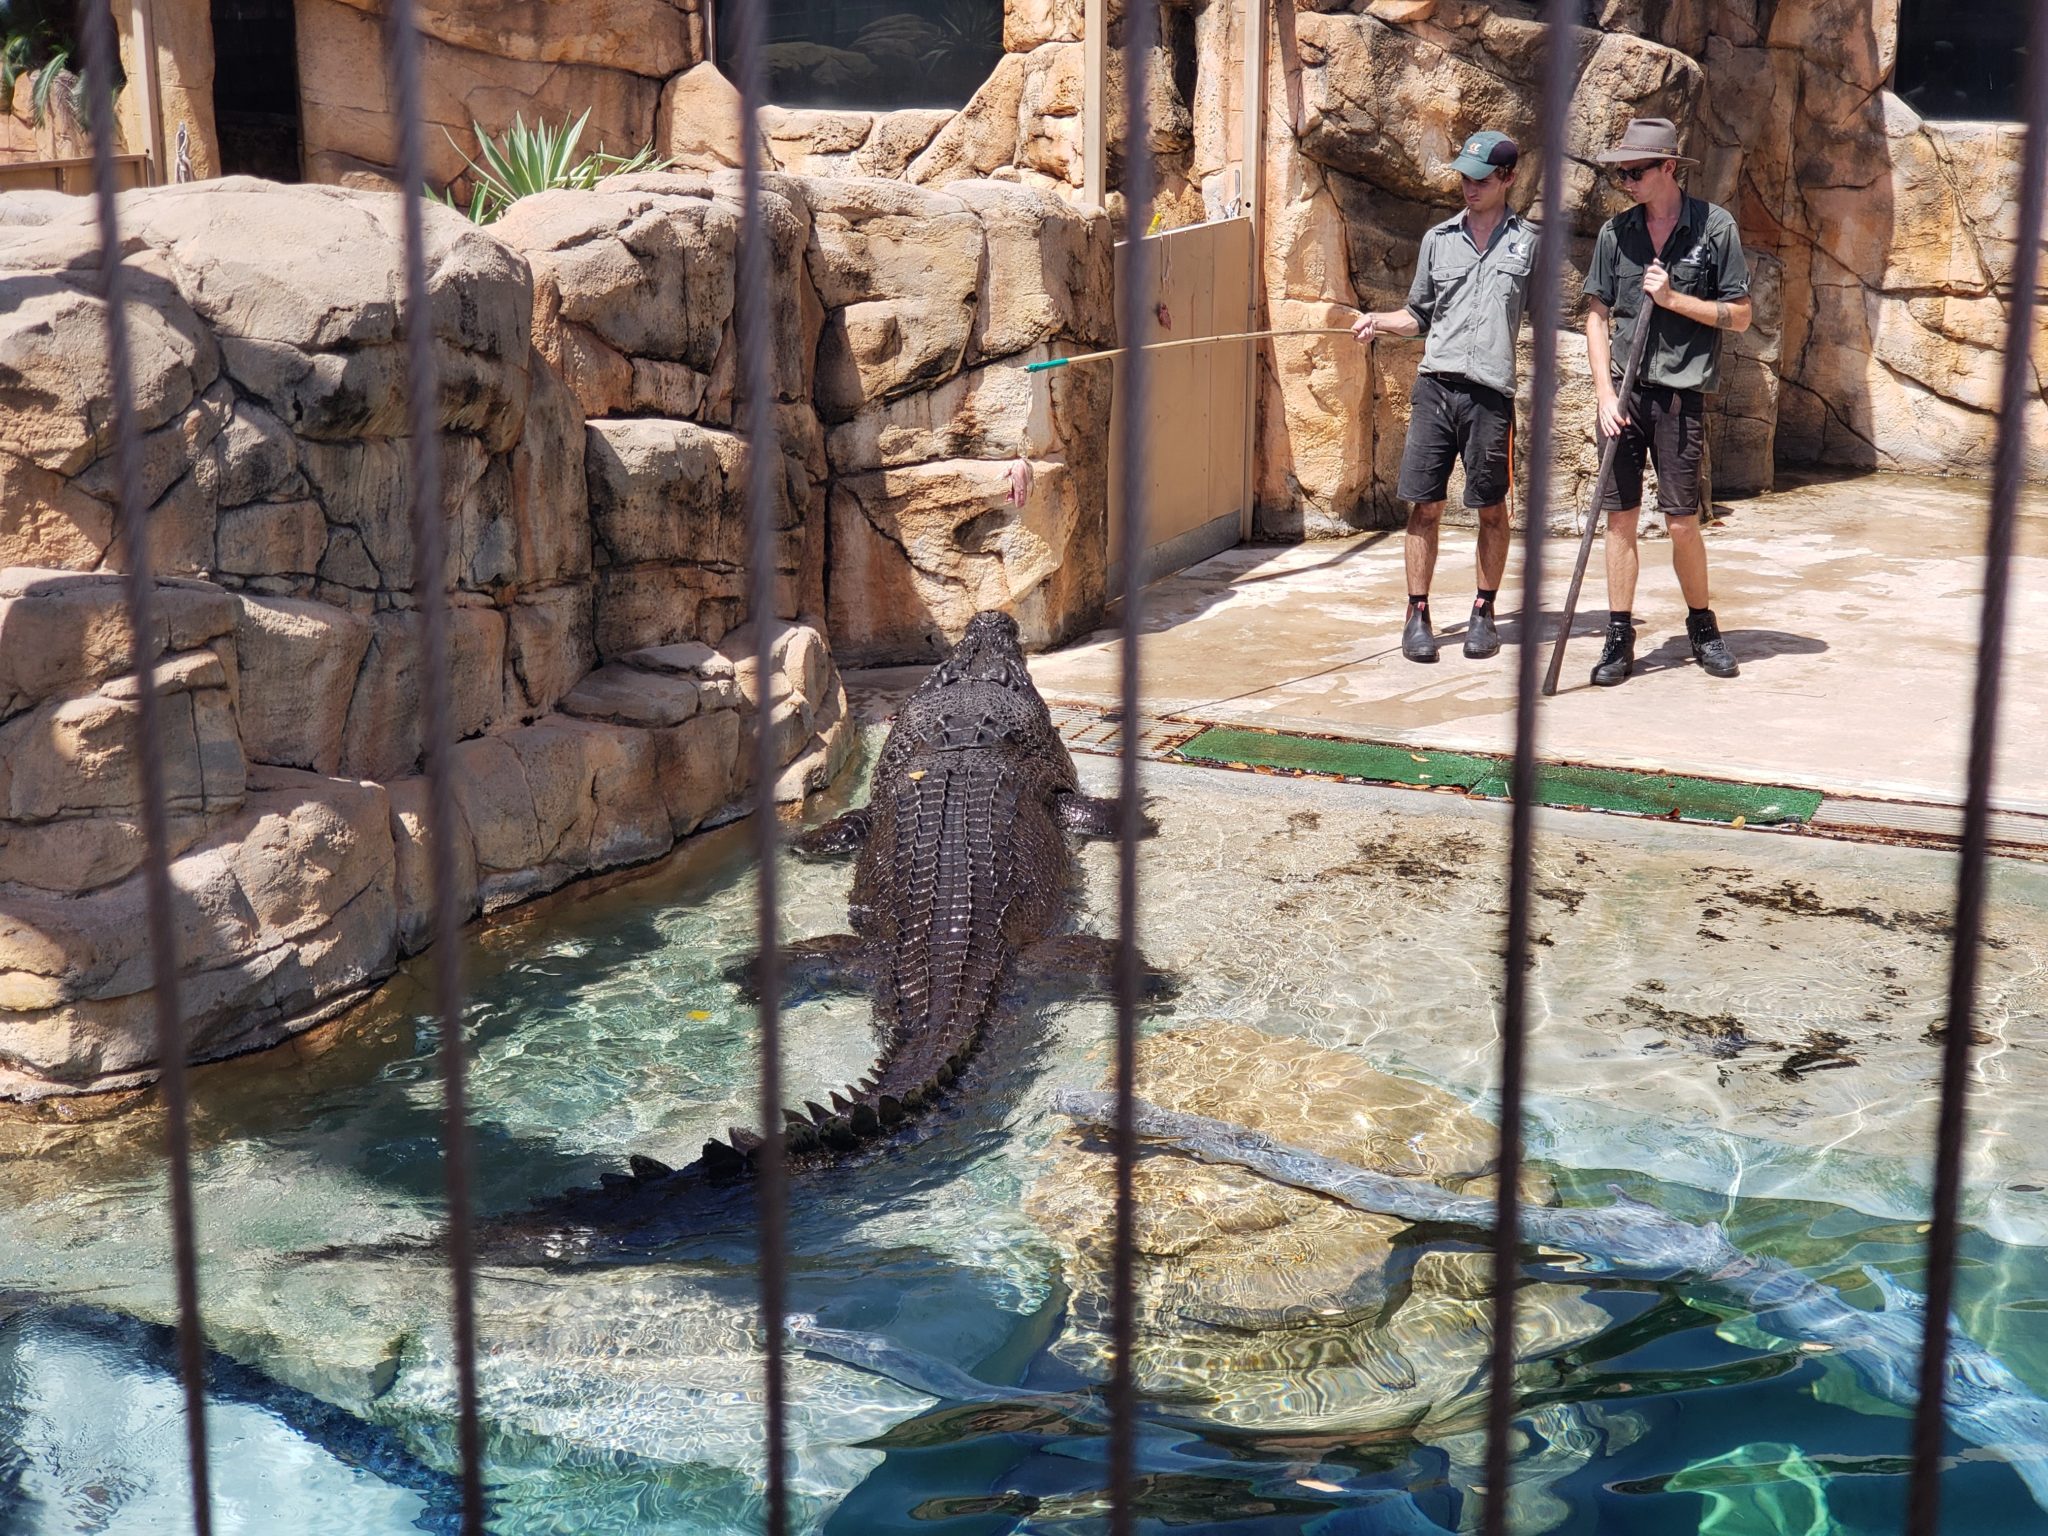 a group of people standing in a zoo enclosure with a large crocodile